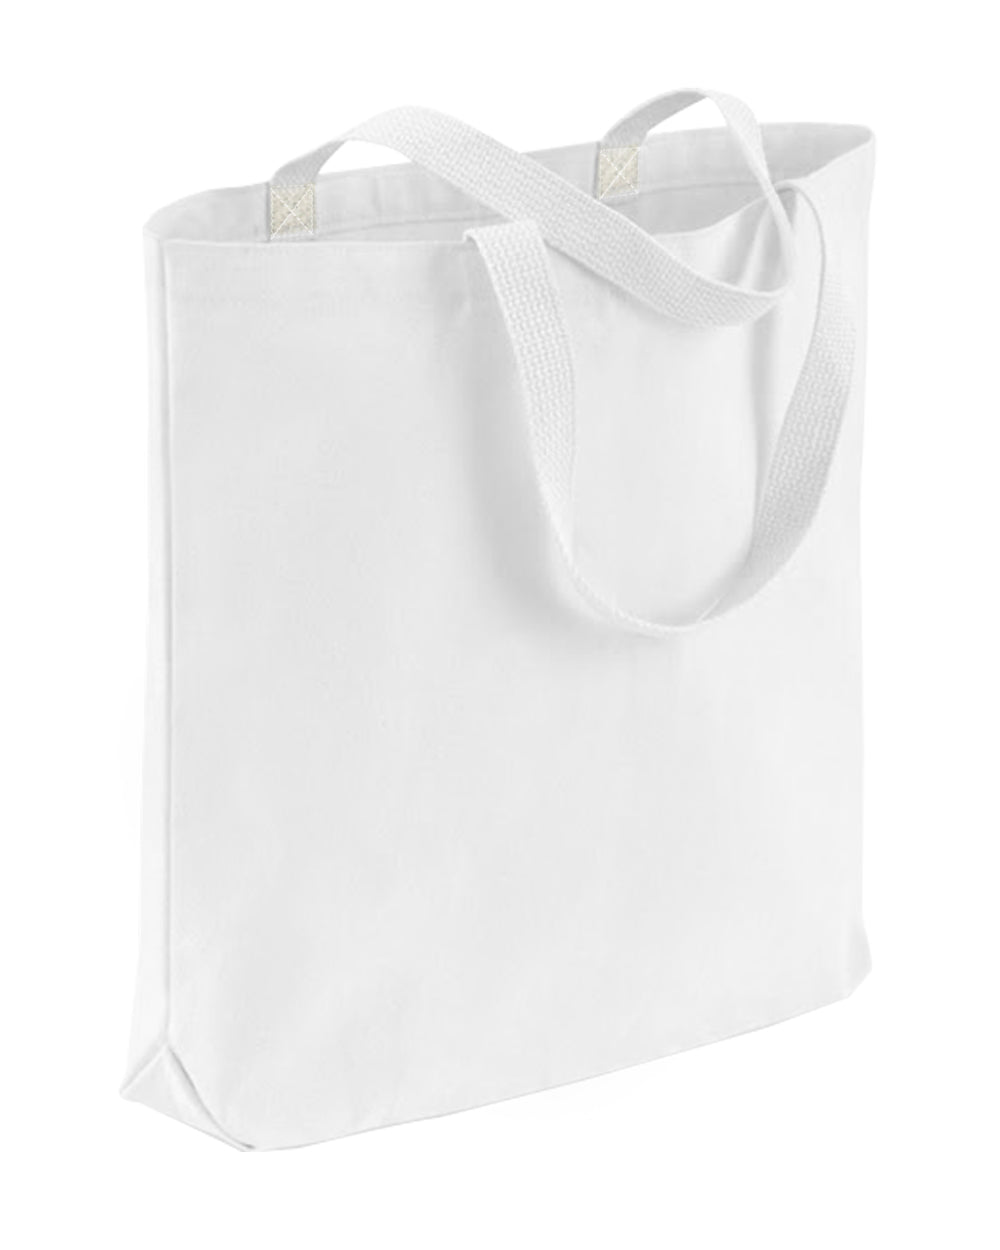 High Quality Promotional Canvas Bag w/Gusset - TG200